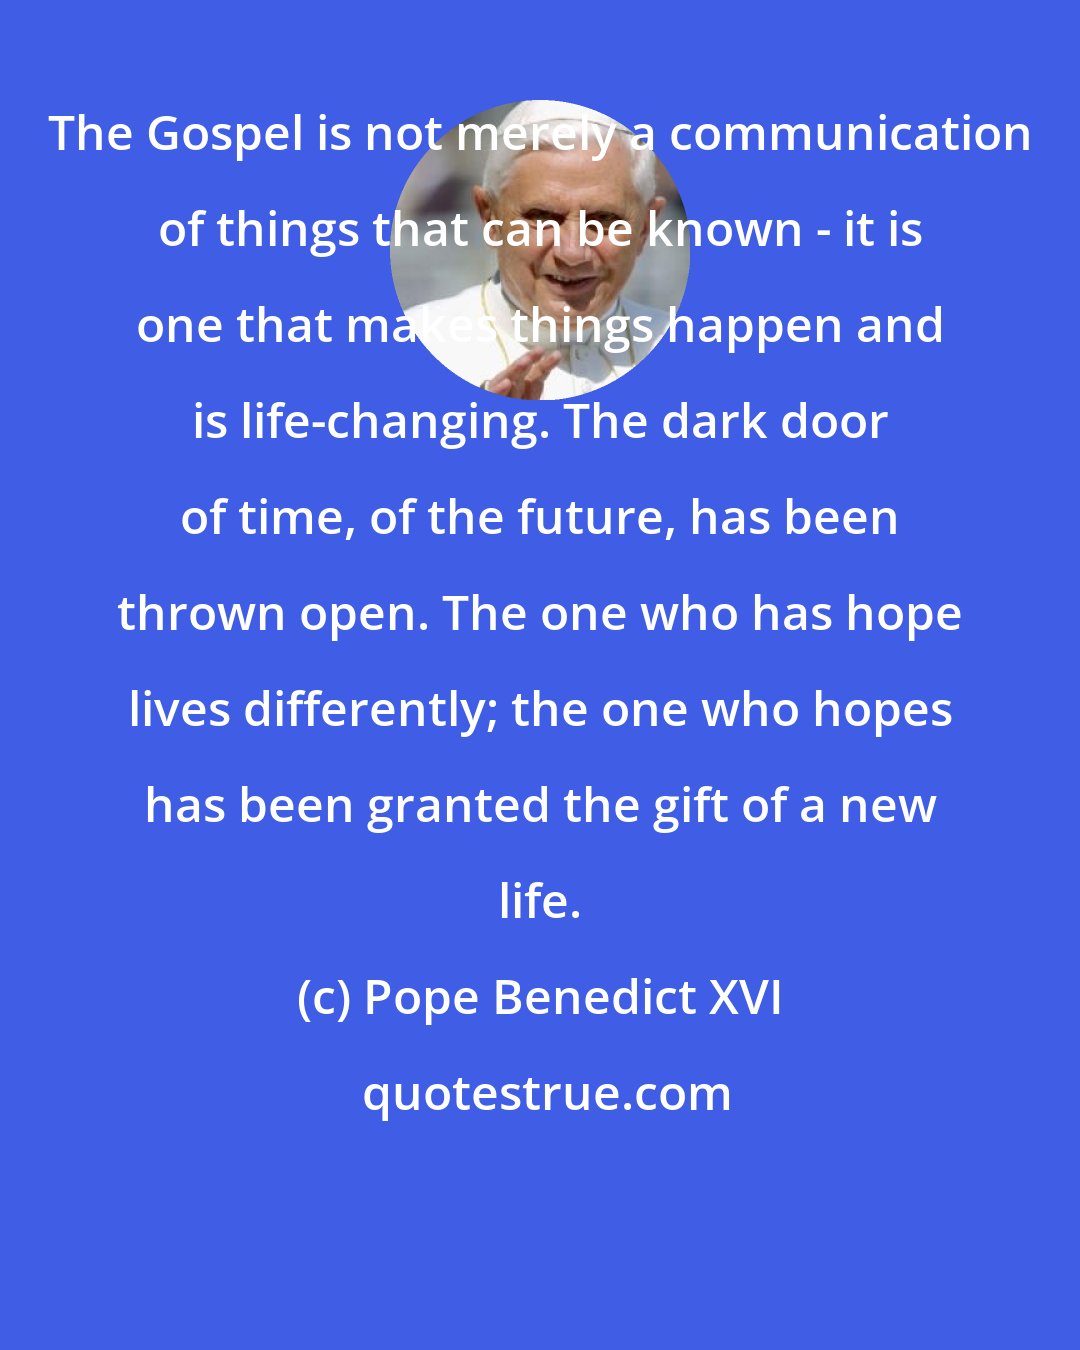 Pope Benedict XVI: The Gospel is not merely a communication of things that can be known - it is one that makes things happen and is life-changing. The dark door of time, of the future, has been thrown open. The one who has hope lives differently; the one who hopes has been granted the gift of a new life.